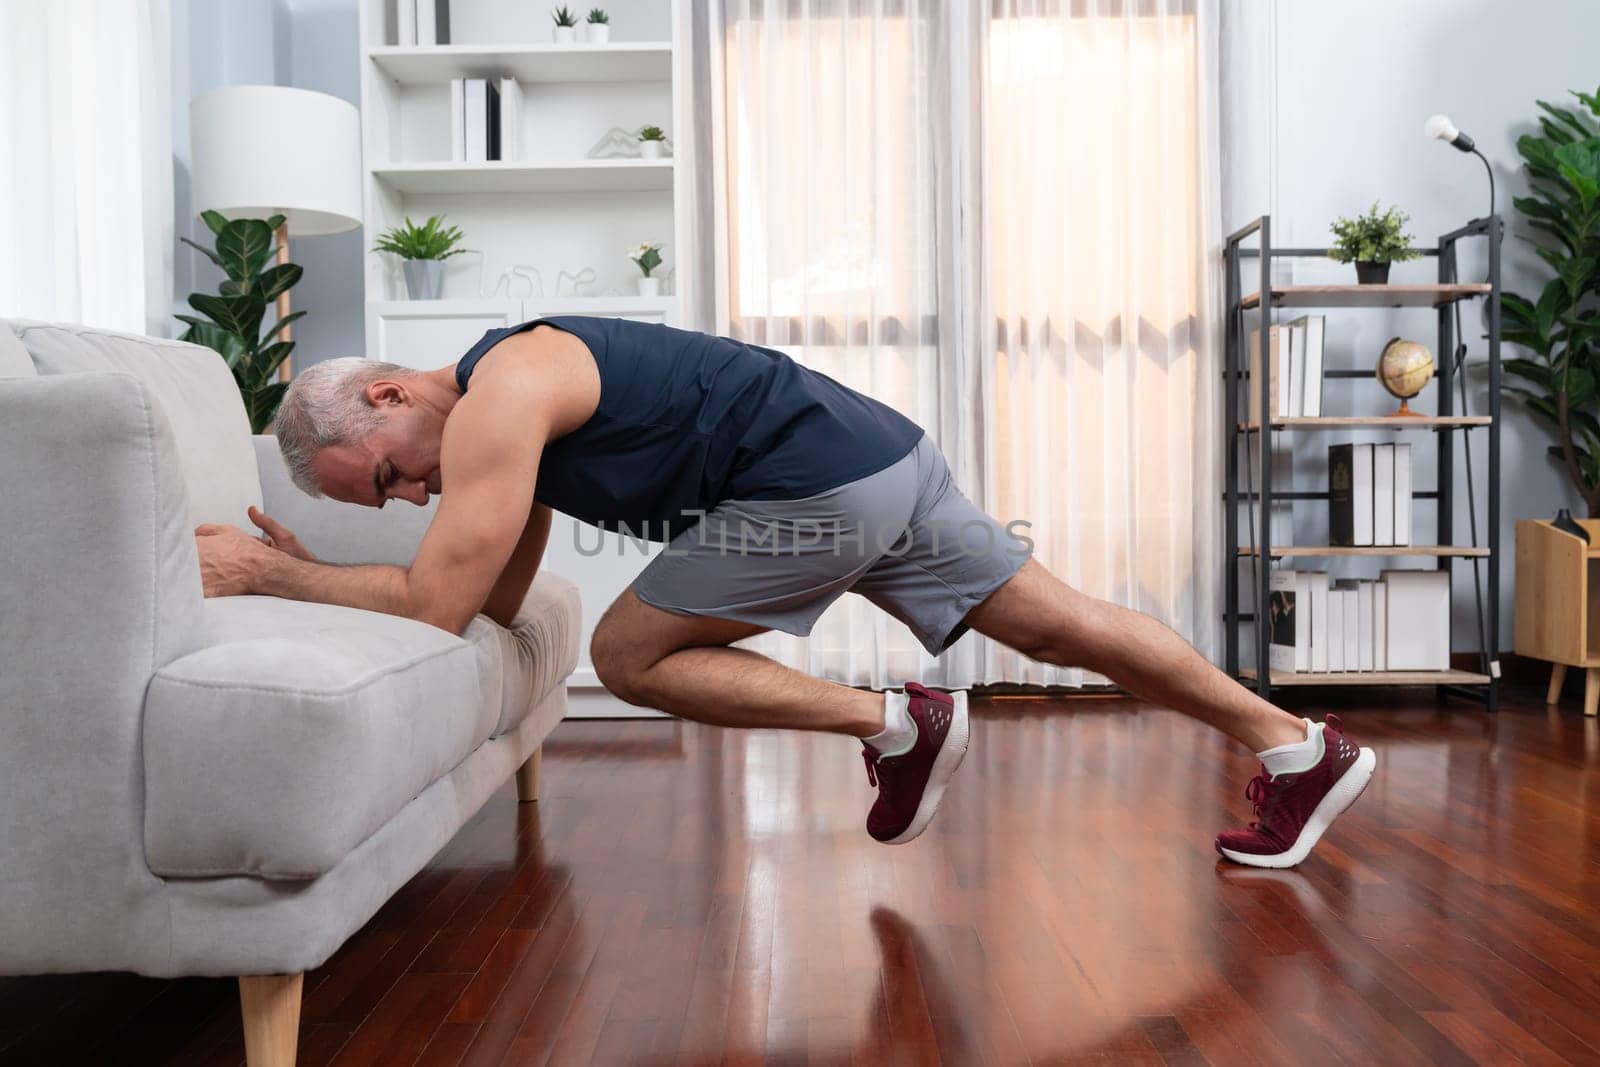 Active and fit senior man warmup and stretching using furniture before home exercising routine at living room. Healthy fitness lifestyle concept after retirement for pensioner. Clout